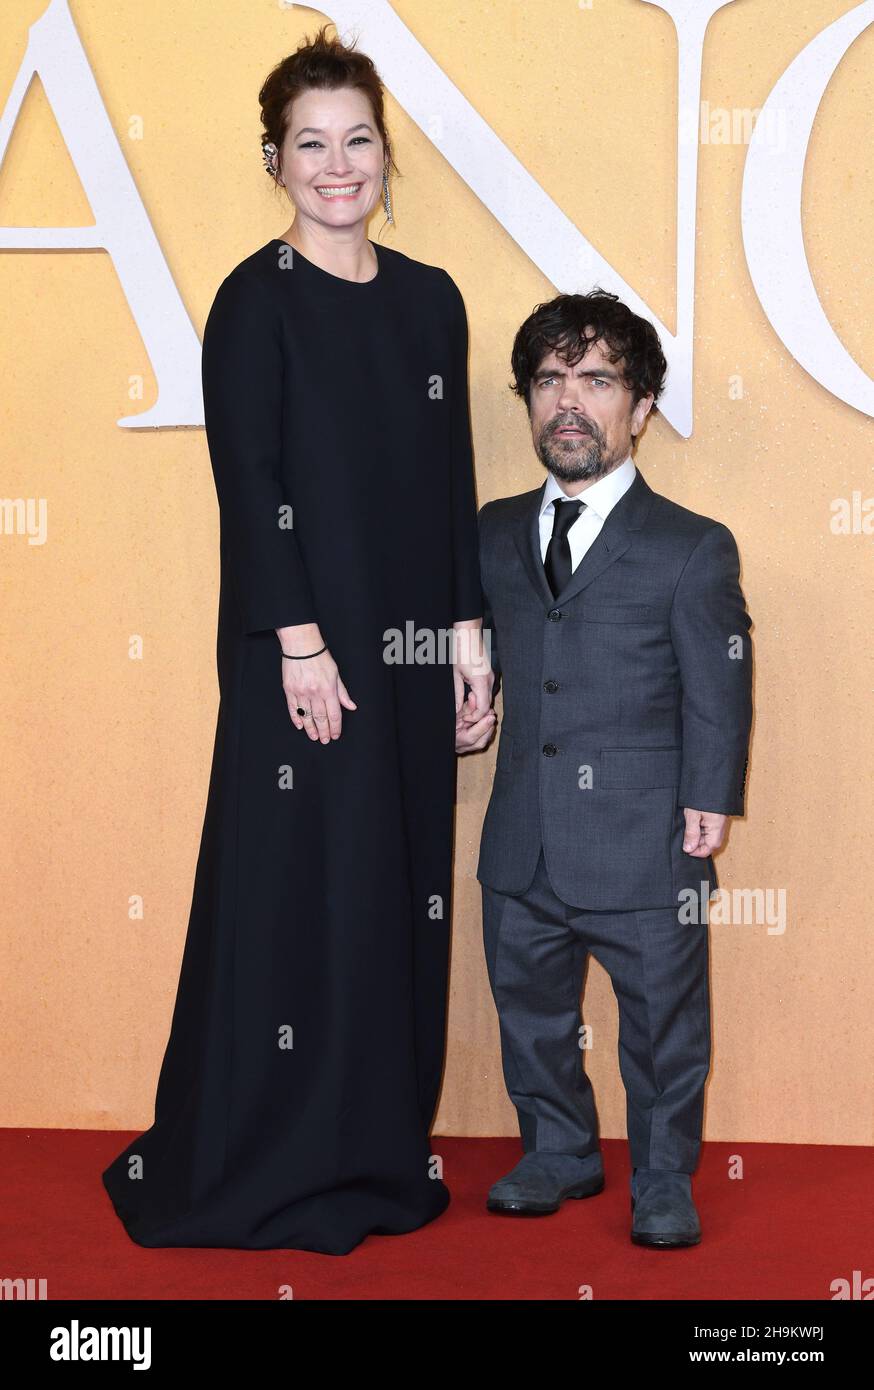 December 7th, 2021. London, UK. Erica Schmidt and Peter Dinklage attending Cyrano UK Premiere, Odeon Luxe Cinema, Leicester Square, London. Credit: Doug Peters/EMPICS/Alamy Live News Stock Photo